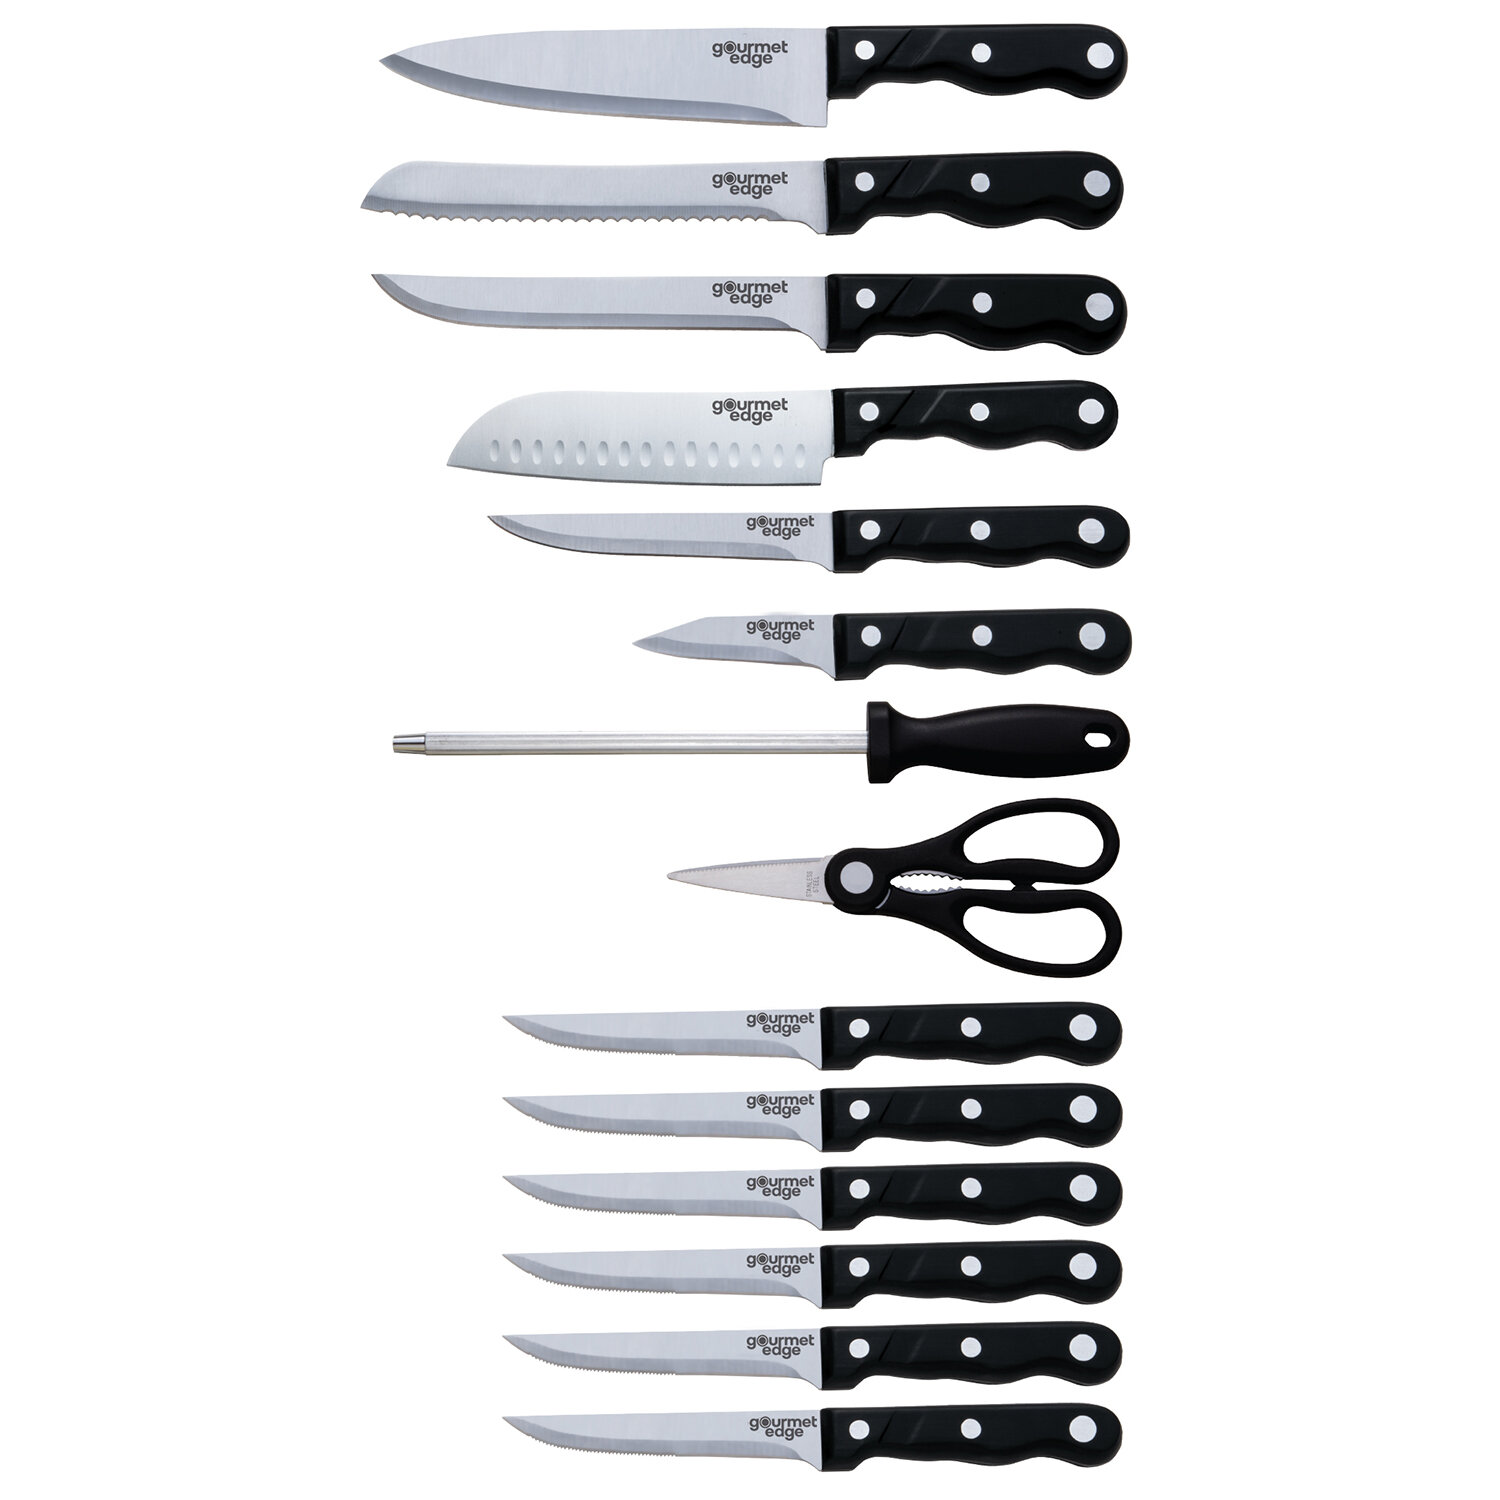 JXWING Professional 15-Piece German High Carbon Stainless Steel Kitchen  Knife Set, Ocean Series Premium Forged Full Tang Chef Knives Set with  Rubber